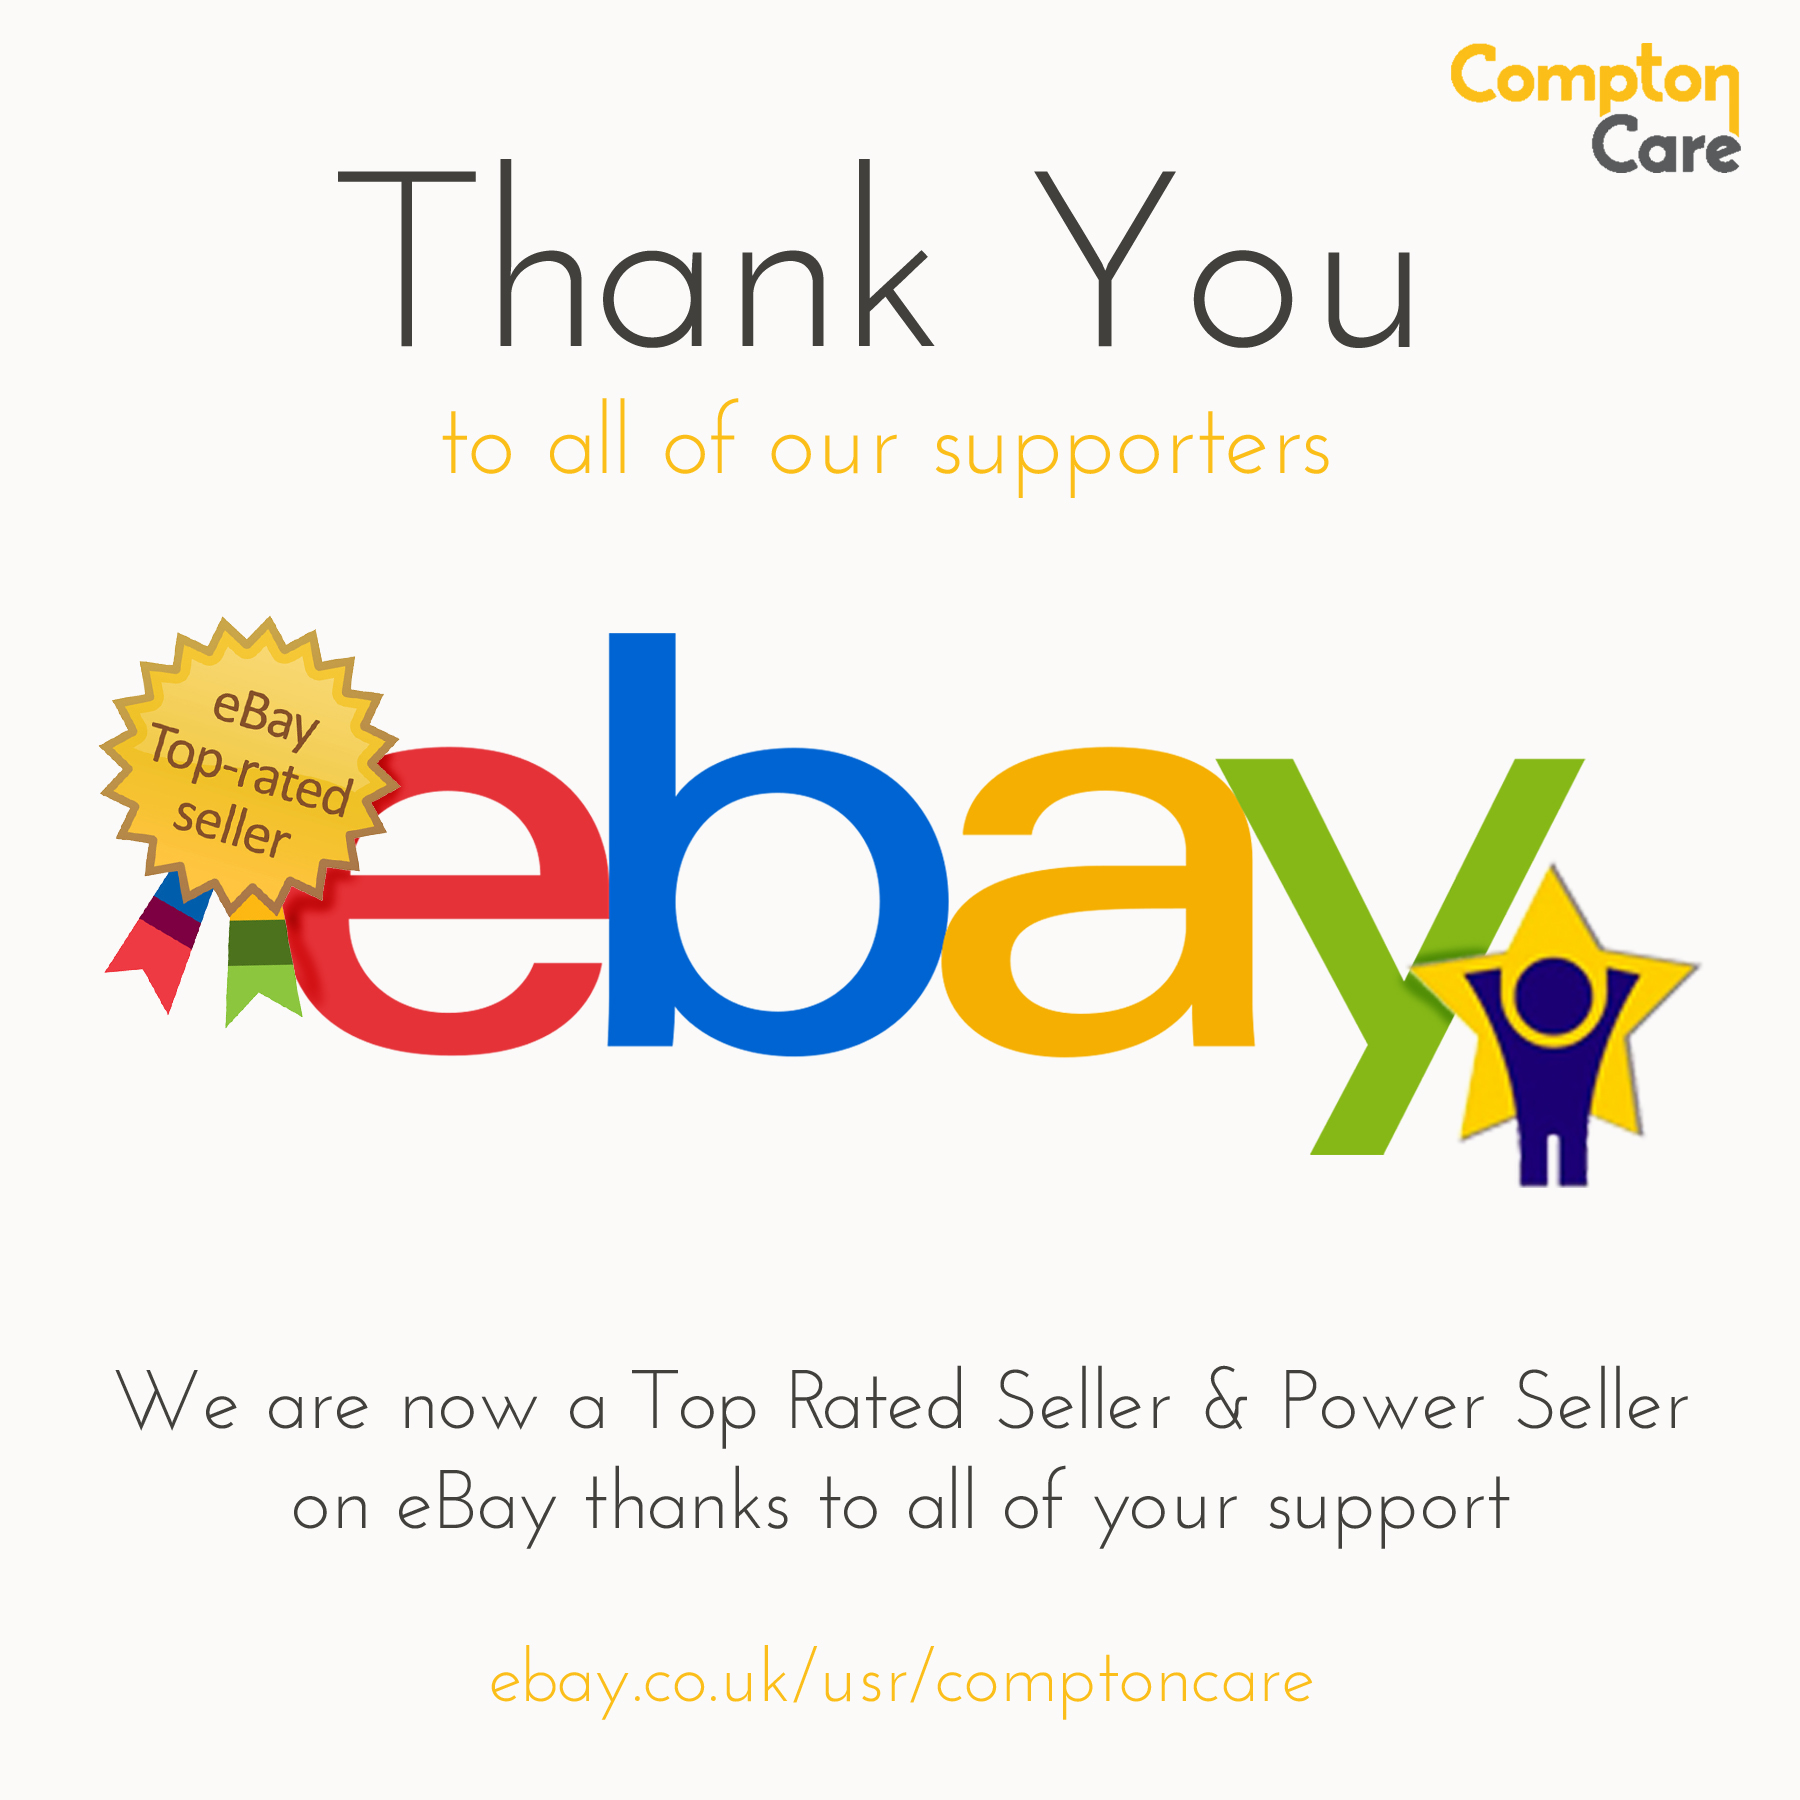 Compton Care on X: Our  store has reached Top Rated Seller and Power  Seller Status! What an achievement! We would like to take this opportunity  to thank all of our supporters